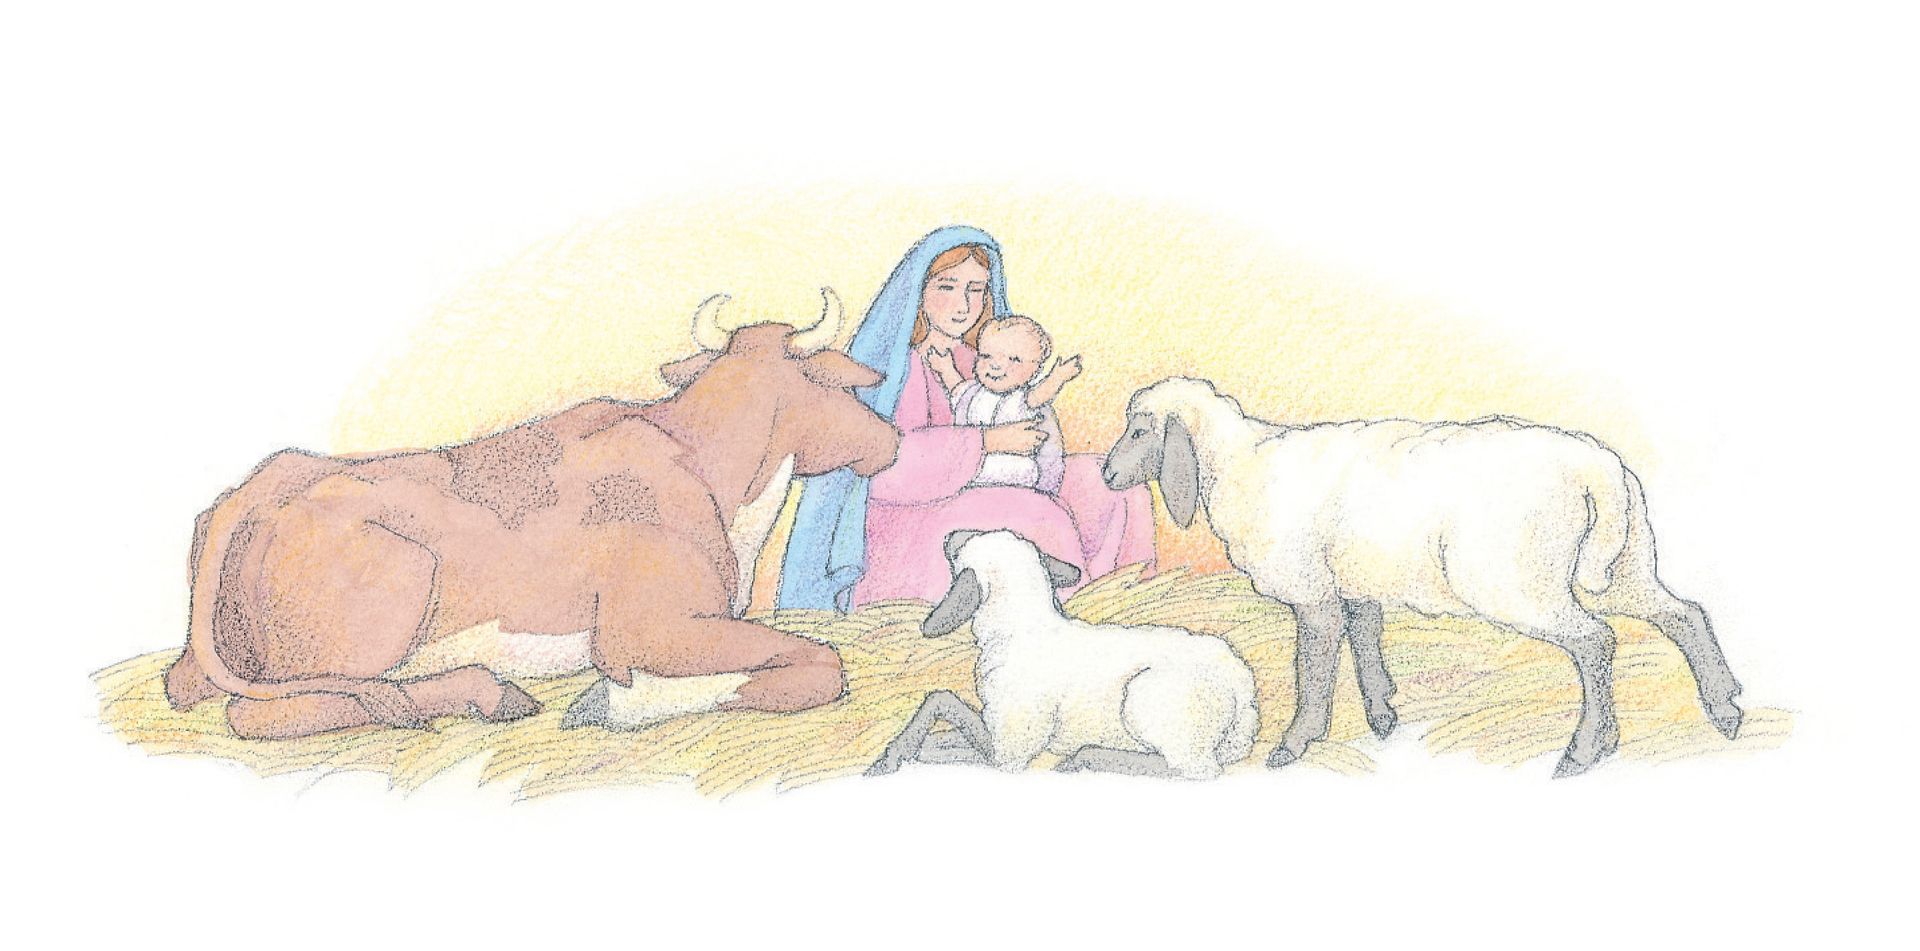 Mary and baby Jesus in the stable, surrounded by animals. From the Children’s Songbook, page 41, “Once within a Lowly Stable”; watercolor illustration by Phyllis Luch.